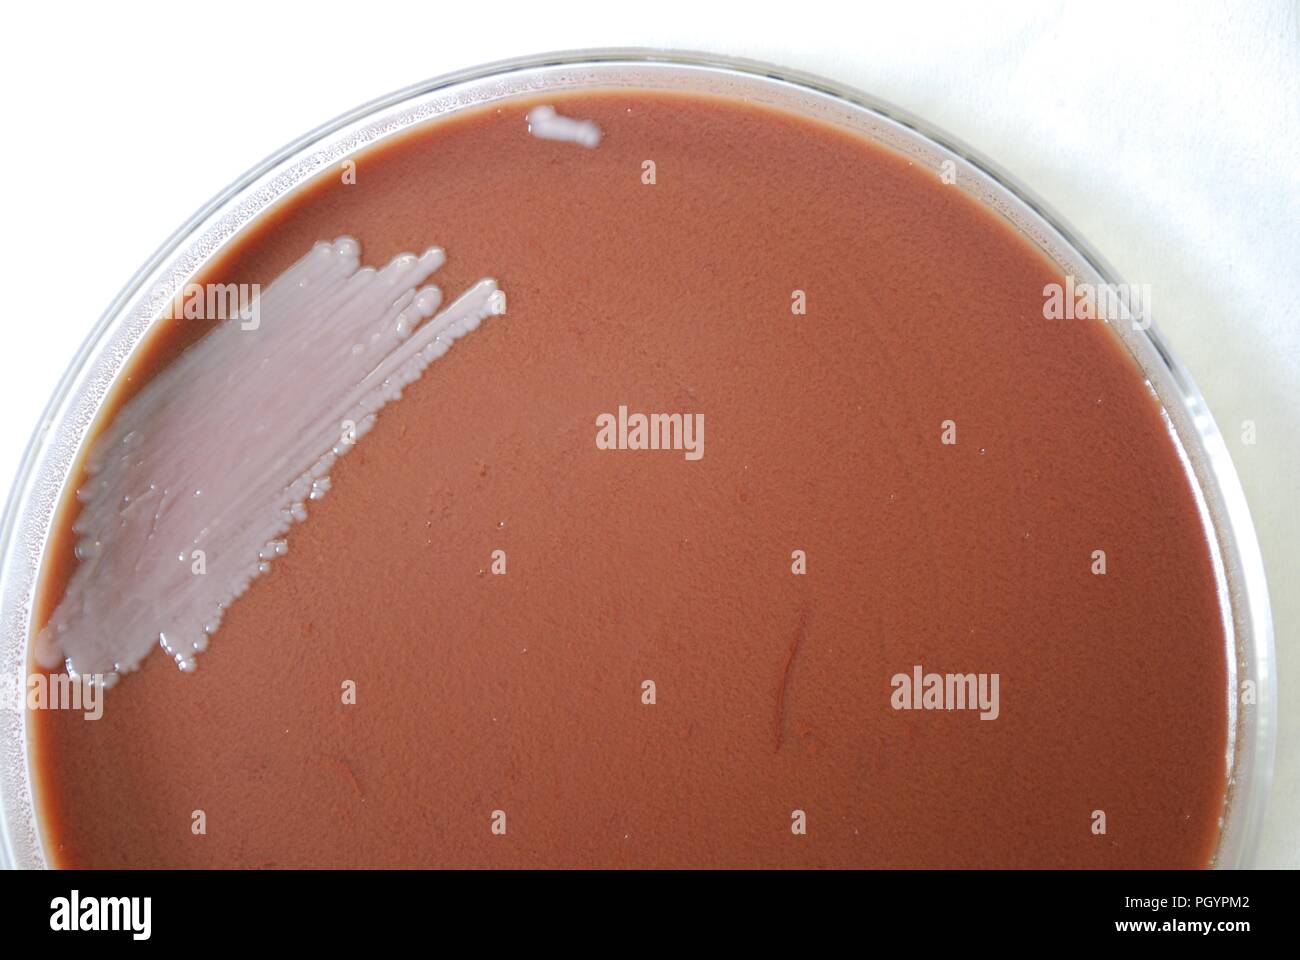 Colonial morphology of Gram-negative Burkholderia mallei bacteria grown 48 hours on a medium of chocolate agar, 2010. Image courtesy Centers for Disease Control (CDC) / Dr Todd Parker, Audra Marsh. () Stock Photo